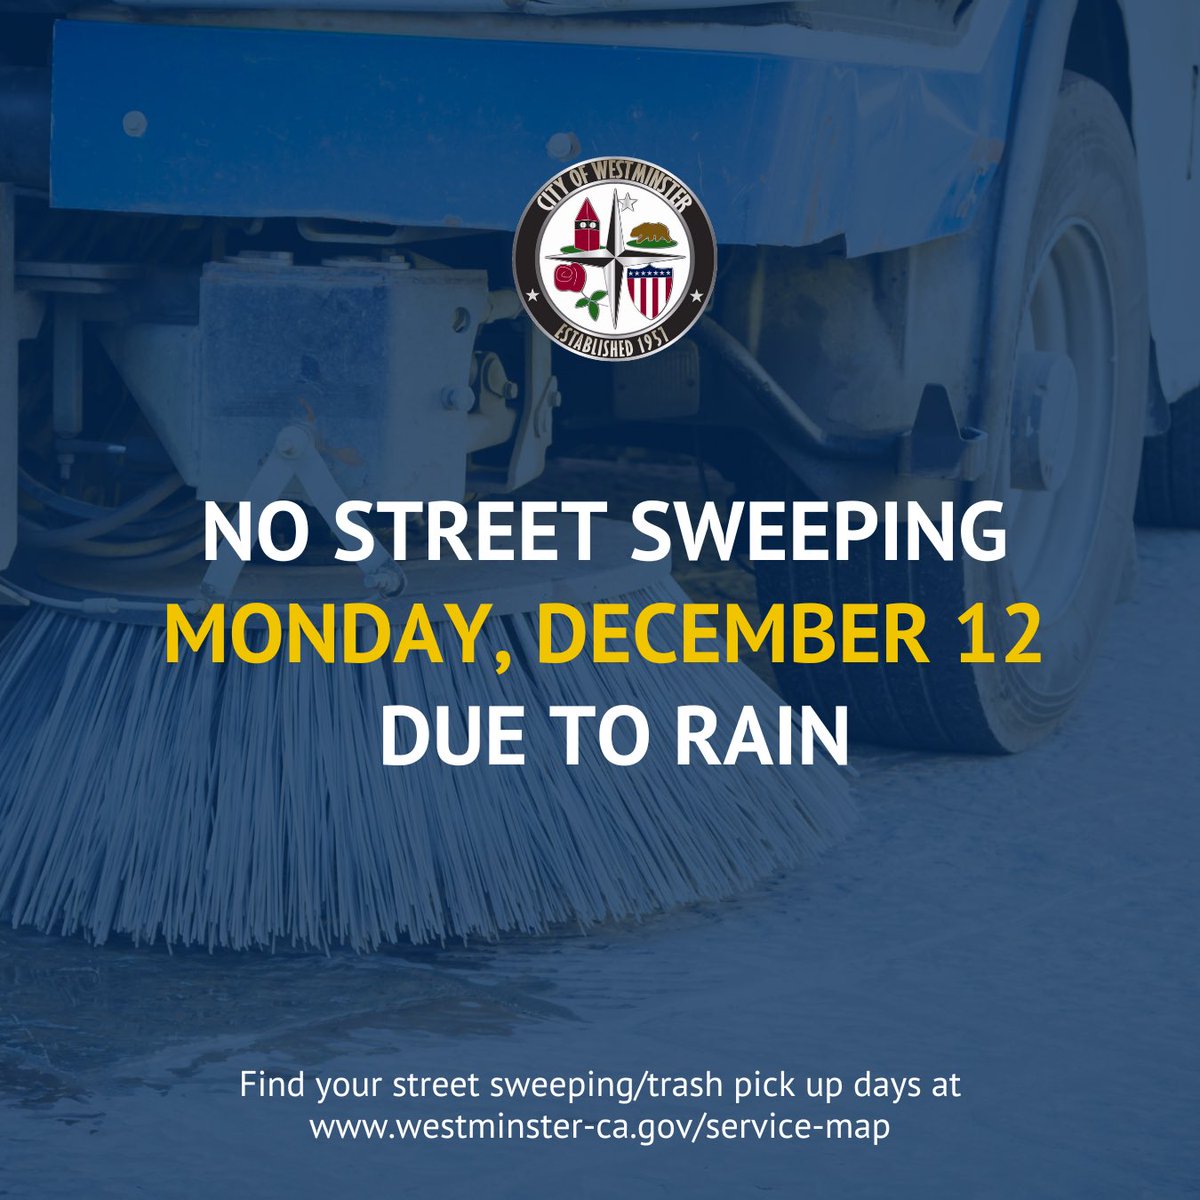 📣 NO street sweeping Monday, December 12, 2022 due to the rain. To find your your street sweeping/trash pick up days, please see our interactive map and enter your address in the upper left hand corner at westminster-ca.gov/service-map